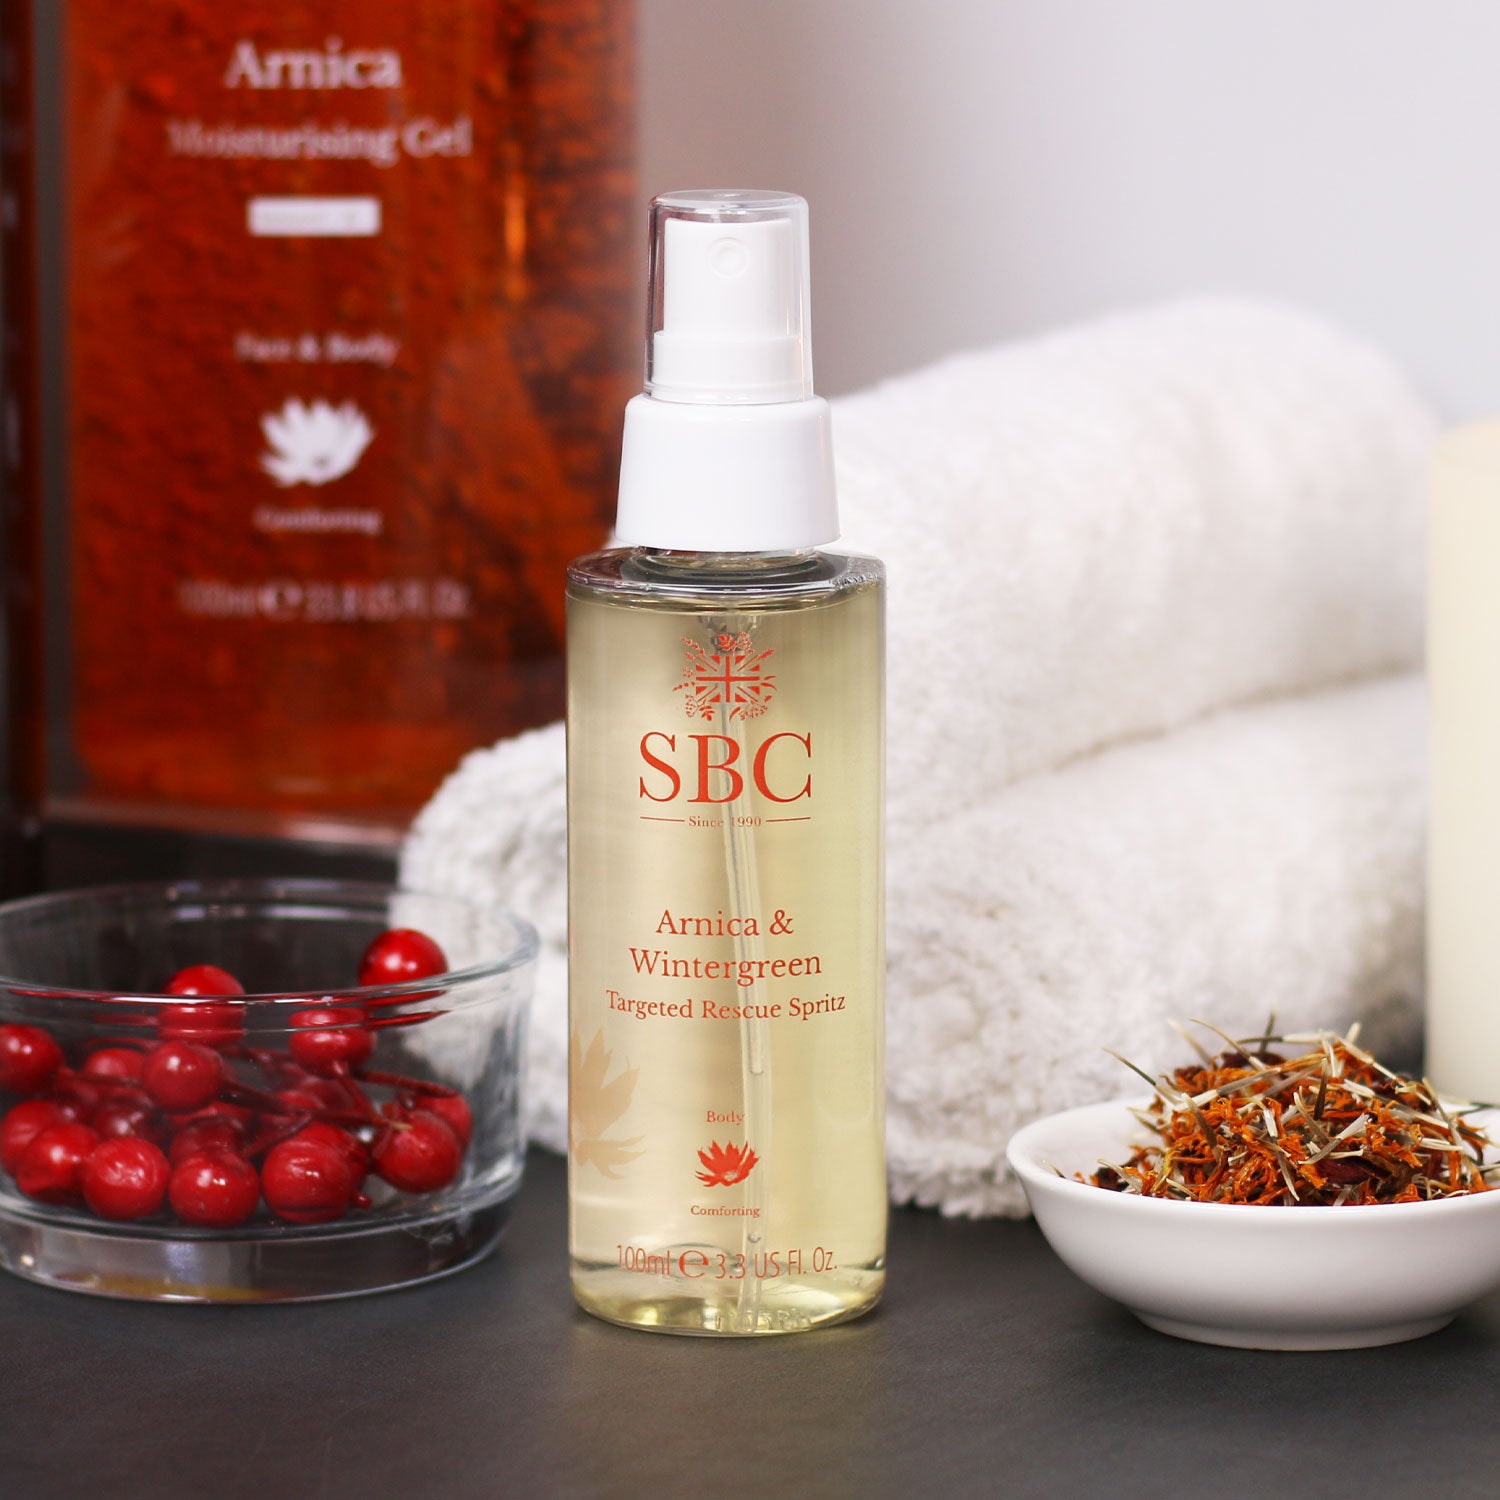 SBC Skncare Arnica & Wintergreen Targeted Rescue Spritz on an orange background